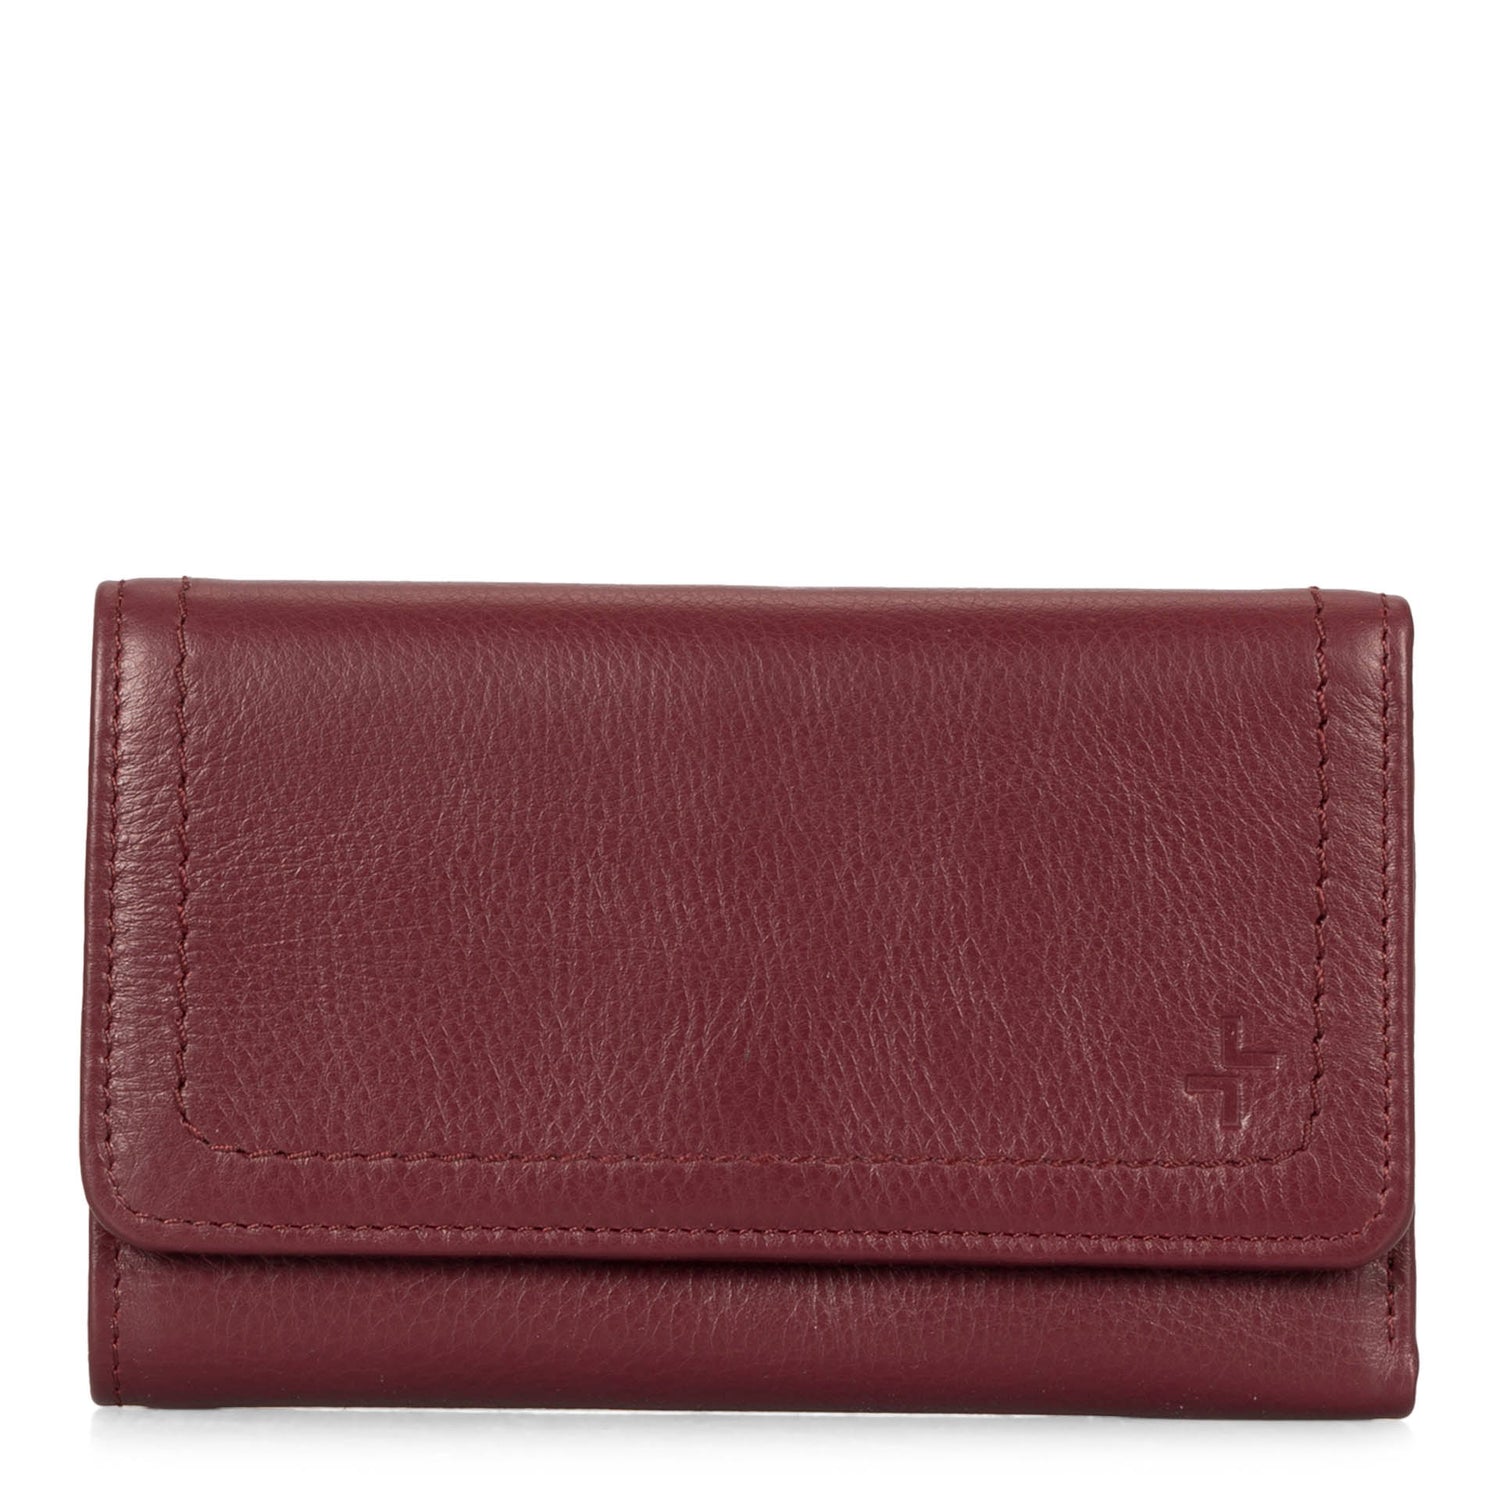 Front side of a burgundy flap wallet for women called Kara designed by Tracker showing its logo and soft leather.